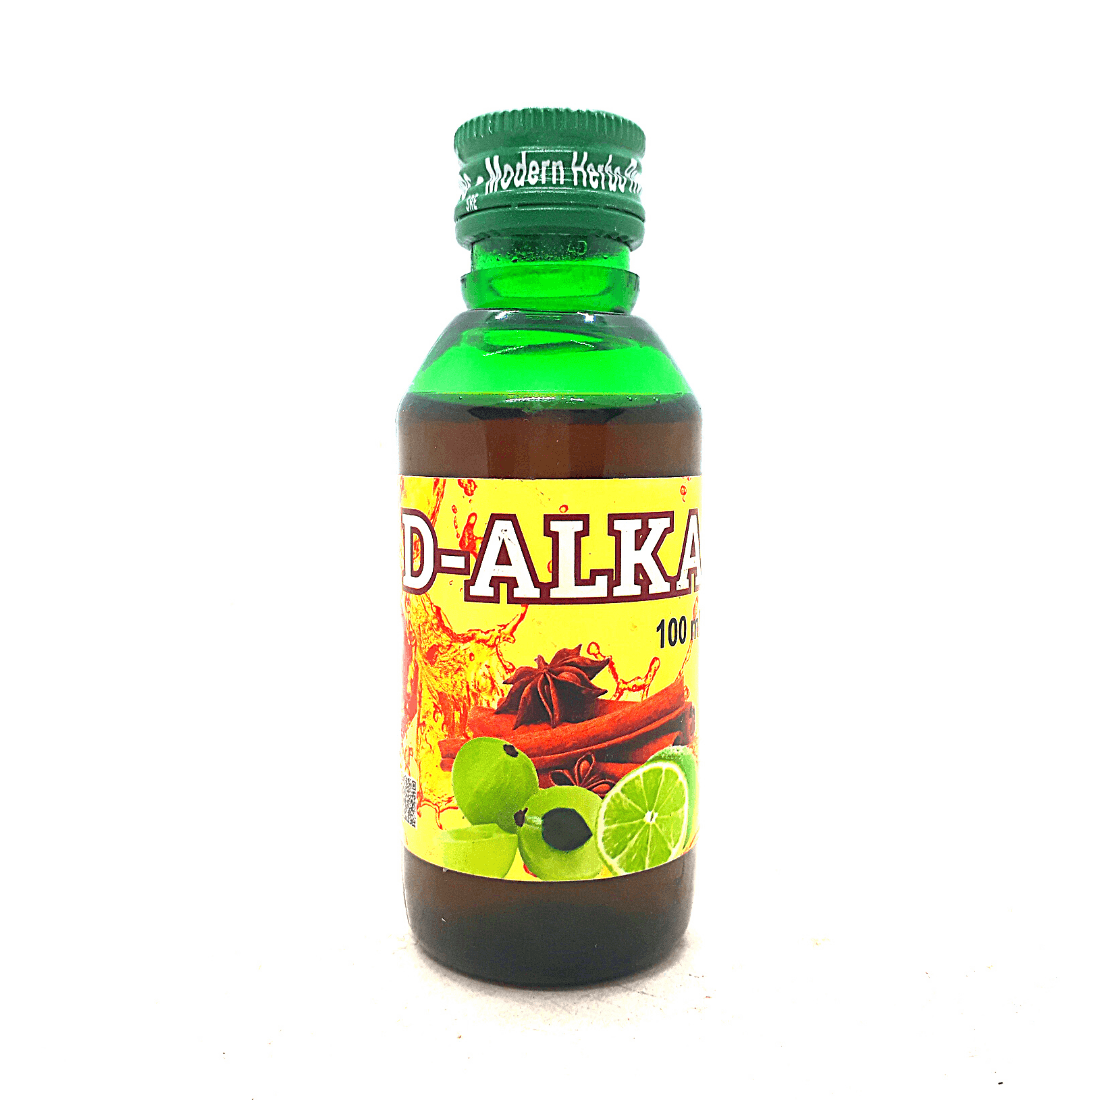 D-Alka syrup works in the of gout, it is effective in cases of high acid levels or acidosis in the blood, and hyperacidity, loss of electrolytes etc.